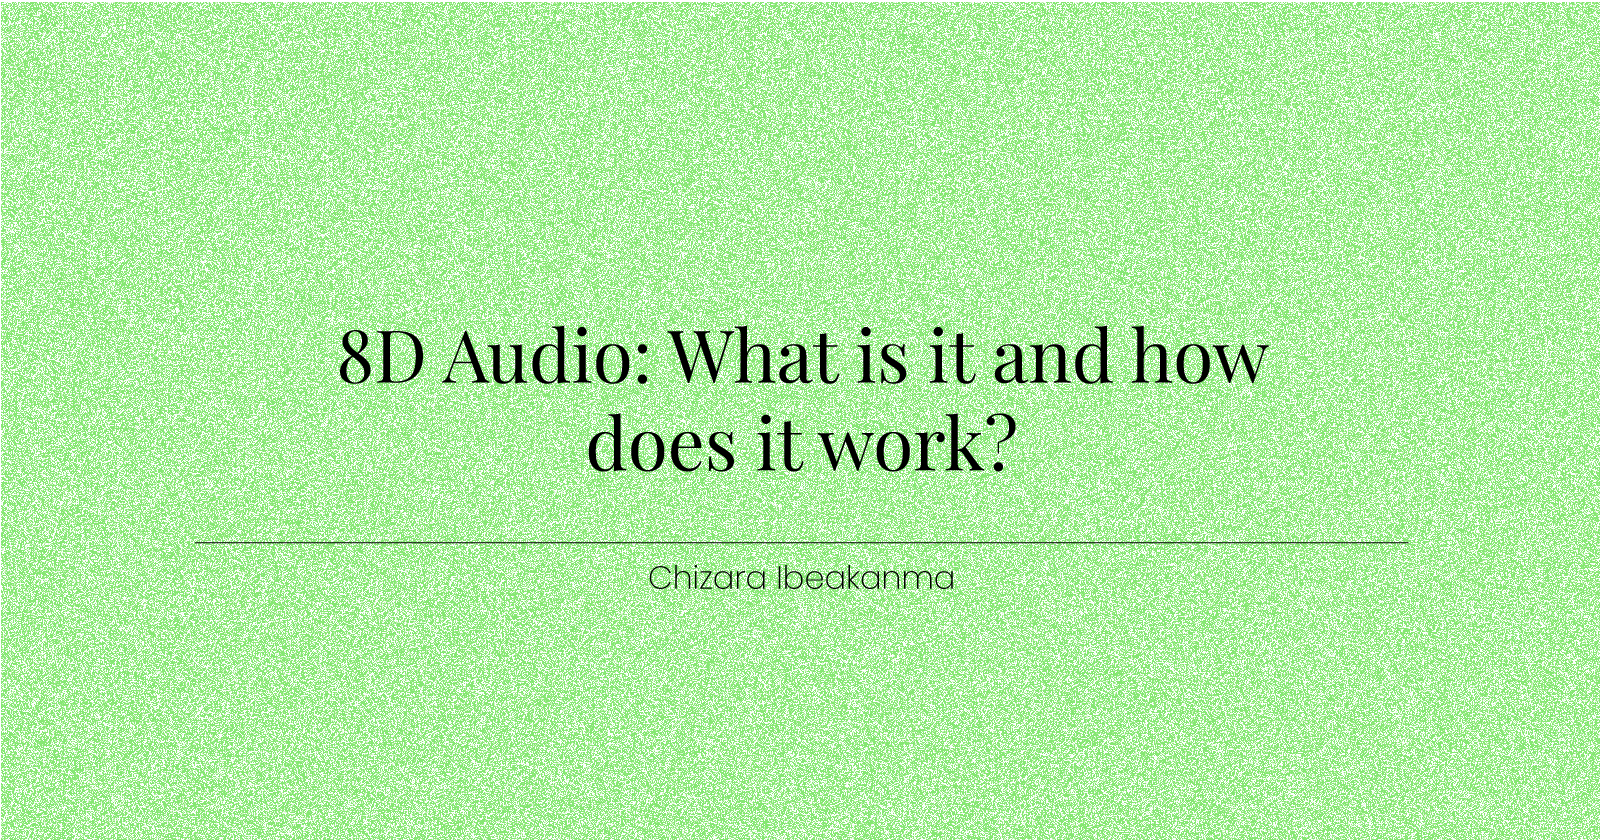 8D Audio: What is it and how does it work?